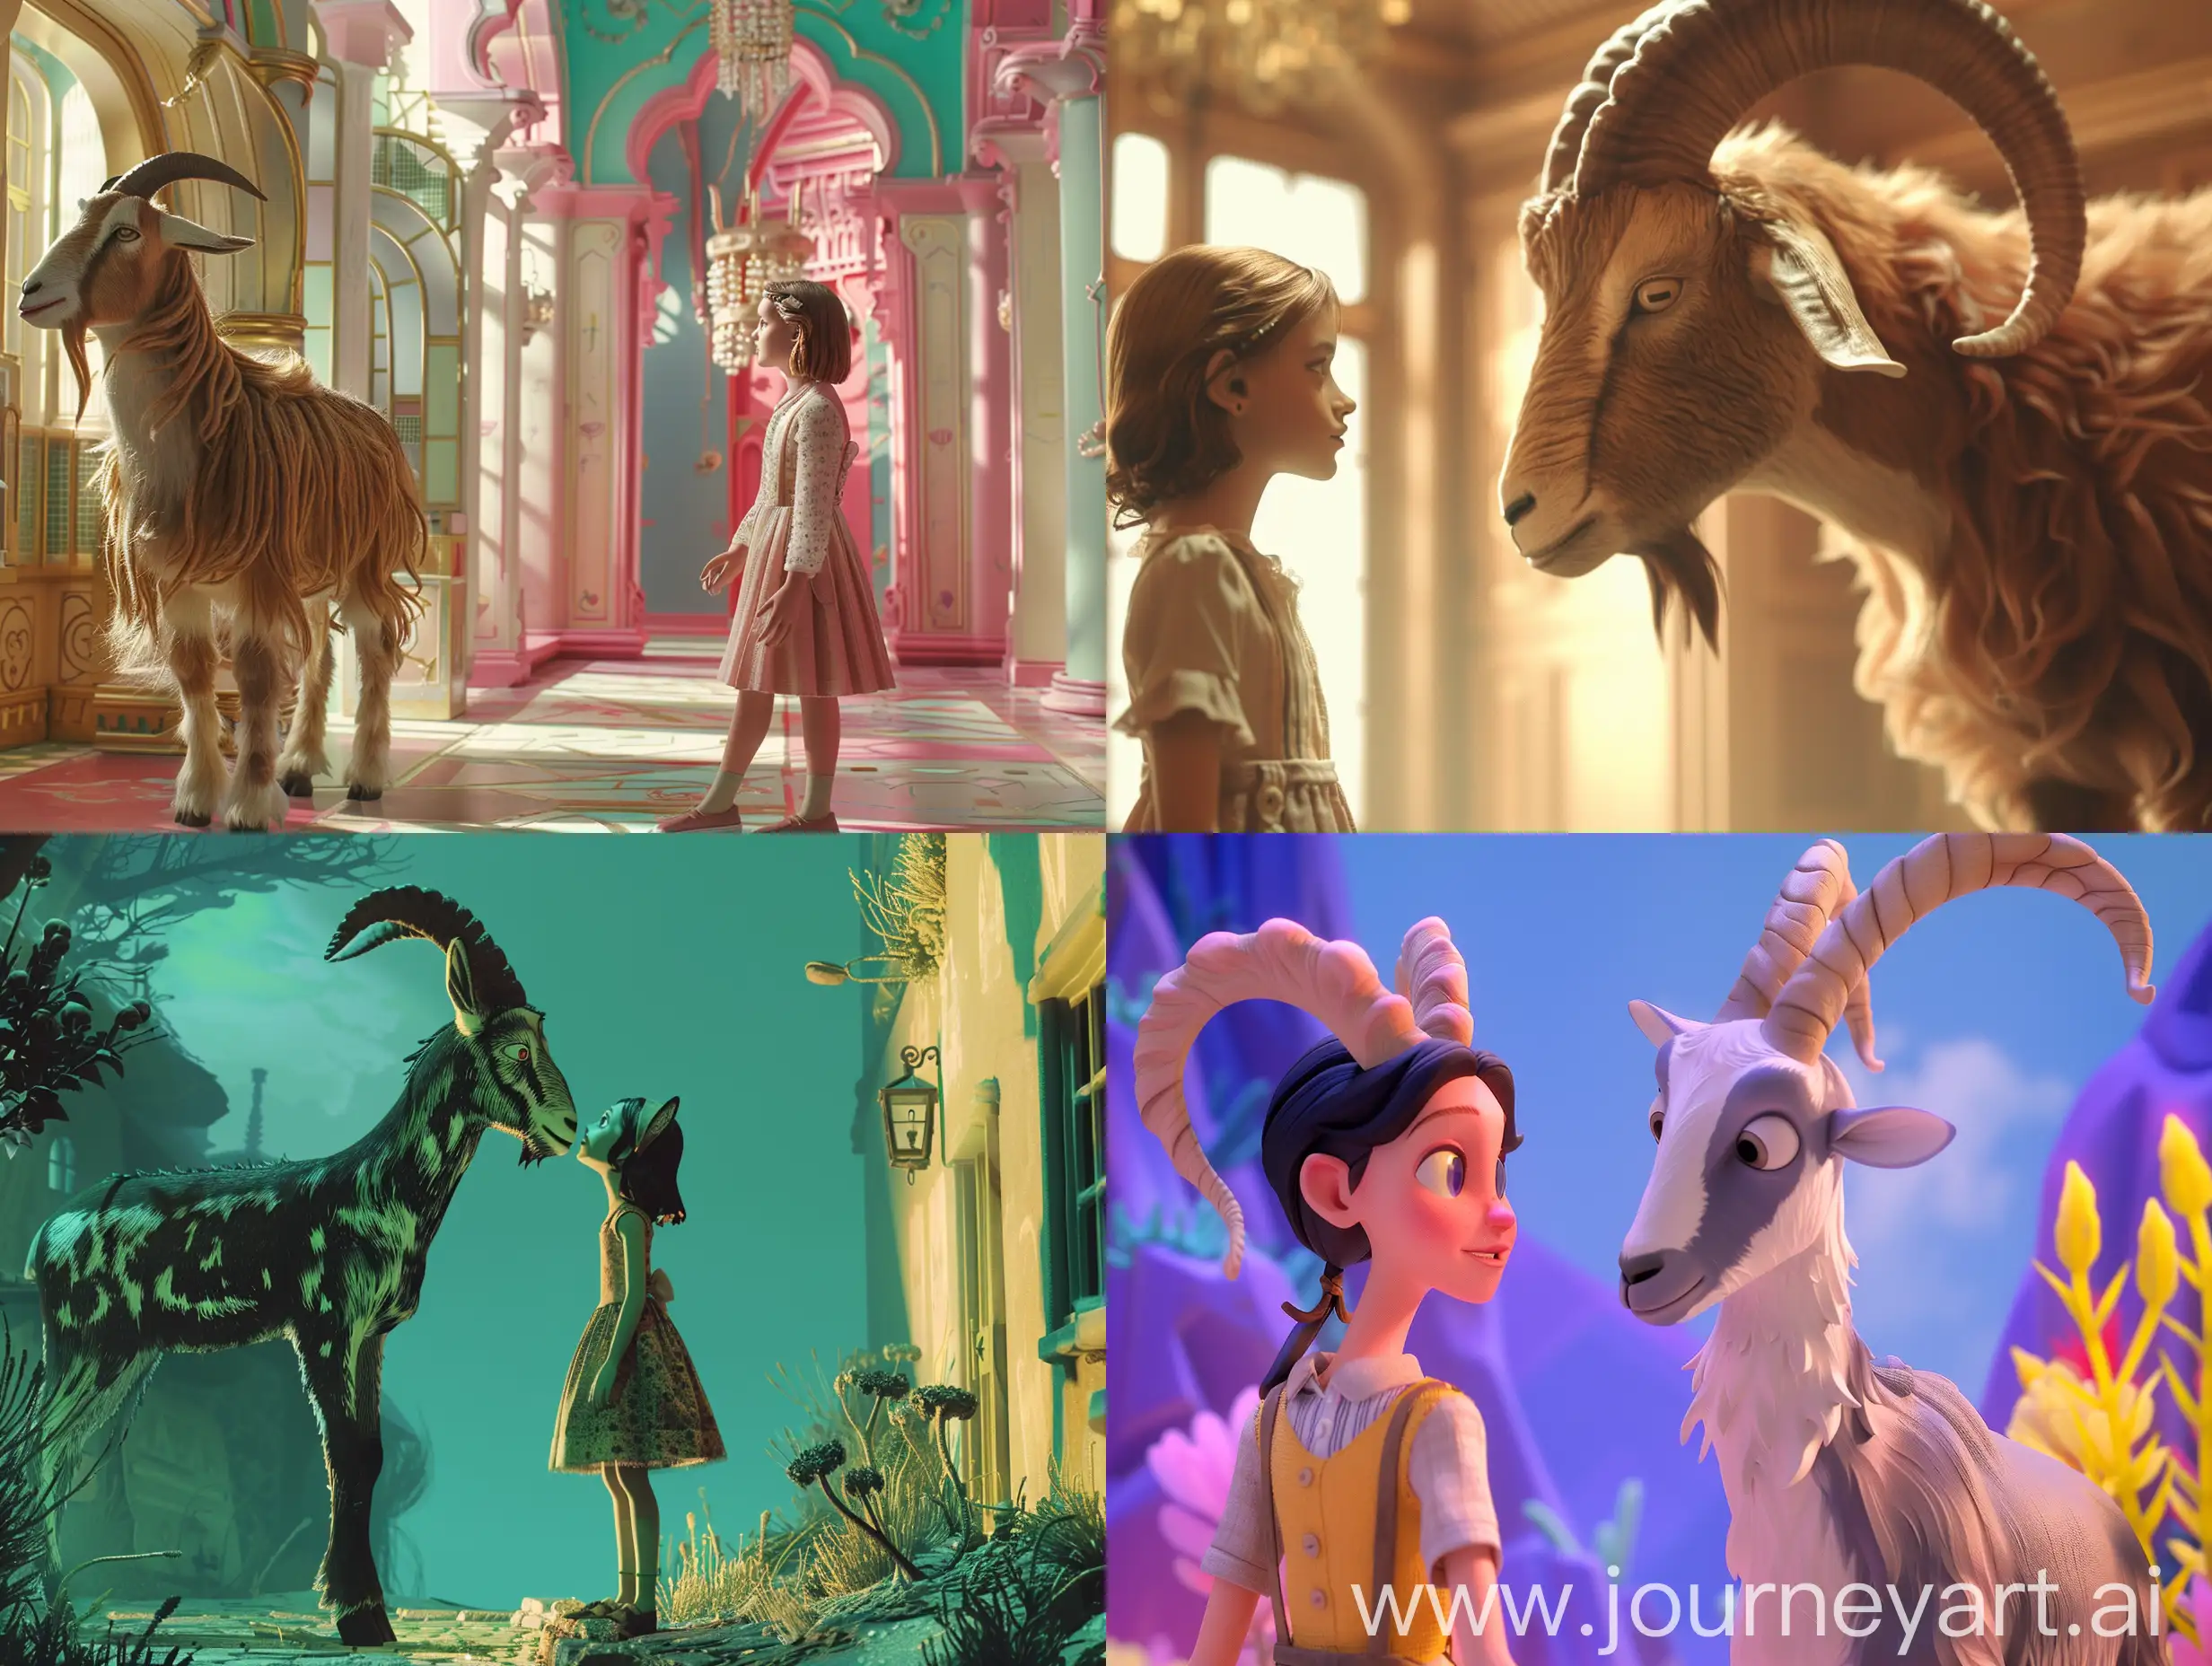 Enchanting-Dreamworld-Whimsical-Tale-of-Love-Between-Girl-and-Anthropomorphic-Goat-in-Distinctive-Wes-Anderson-Color-Palette